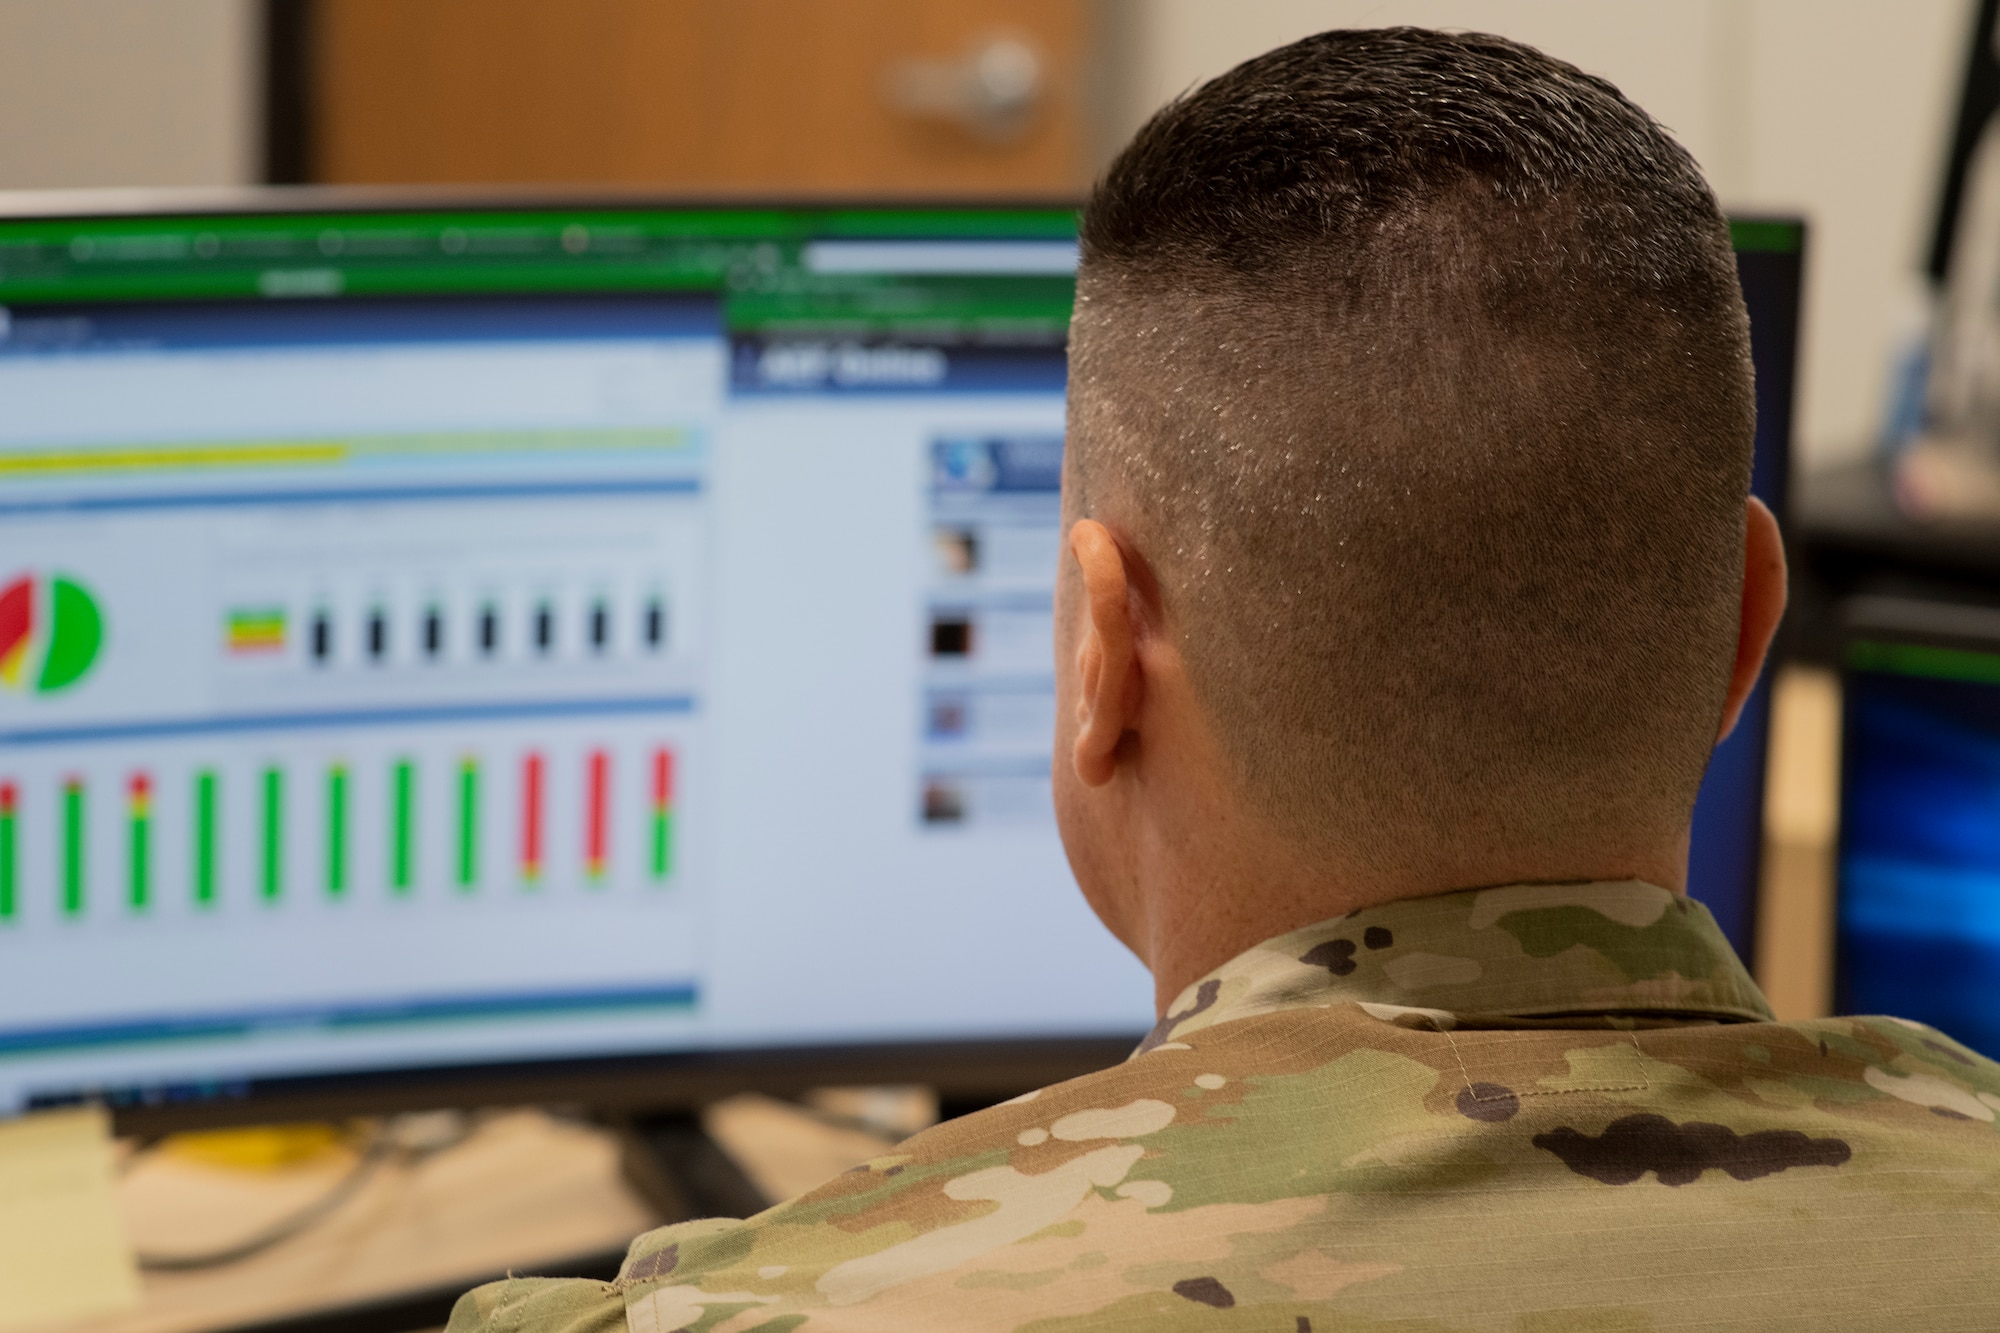 U.S. Air Force Tech. Sgt. Robert Semcho, 325th Logistics Readiness Squadron unit deployment manager, reviews the Commander Toolkit, a web-based tracking program used to track unit readiness, at Tyndall Air Force Base, Florida, July 15, 2022. UDMs use the CC Toolkit to ensure their unit is deployment ready, including annual training, medical appointments and physical fitness assessments.  (U.S. Air Force photo by Staff Sgt. Cheyenne Lewis)